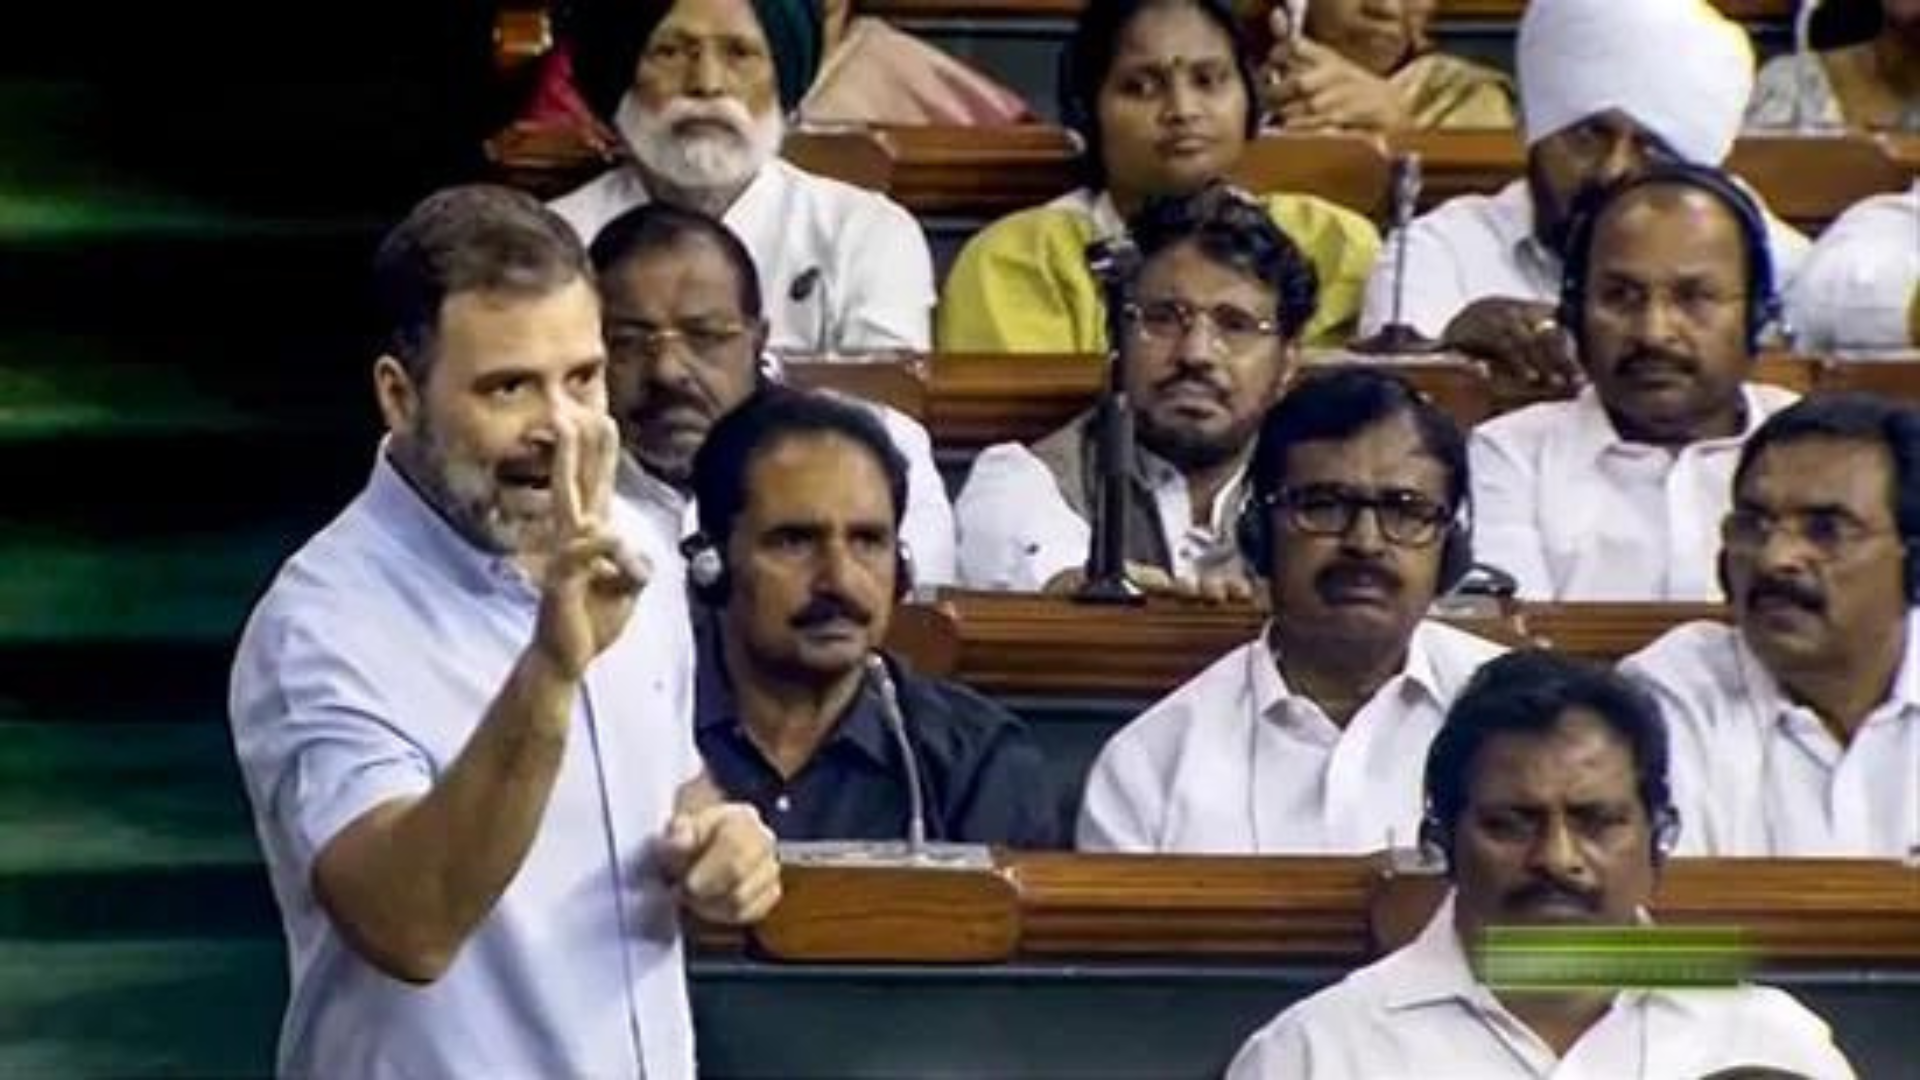 Rahul Gandhi Accuses Self-Proclaimed Hindus of Violence, Highlights Congress’s Symbol of Fearlessness